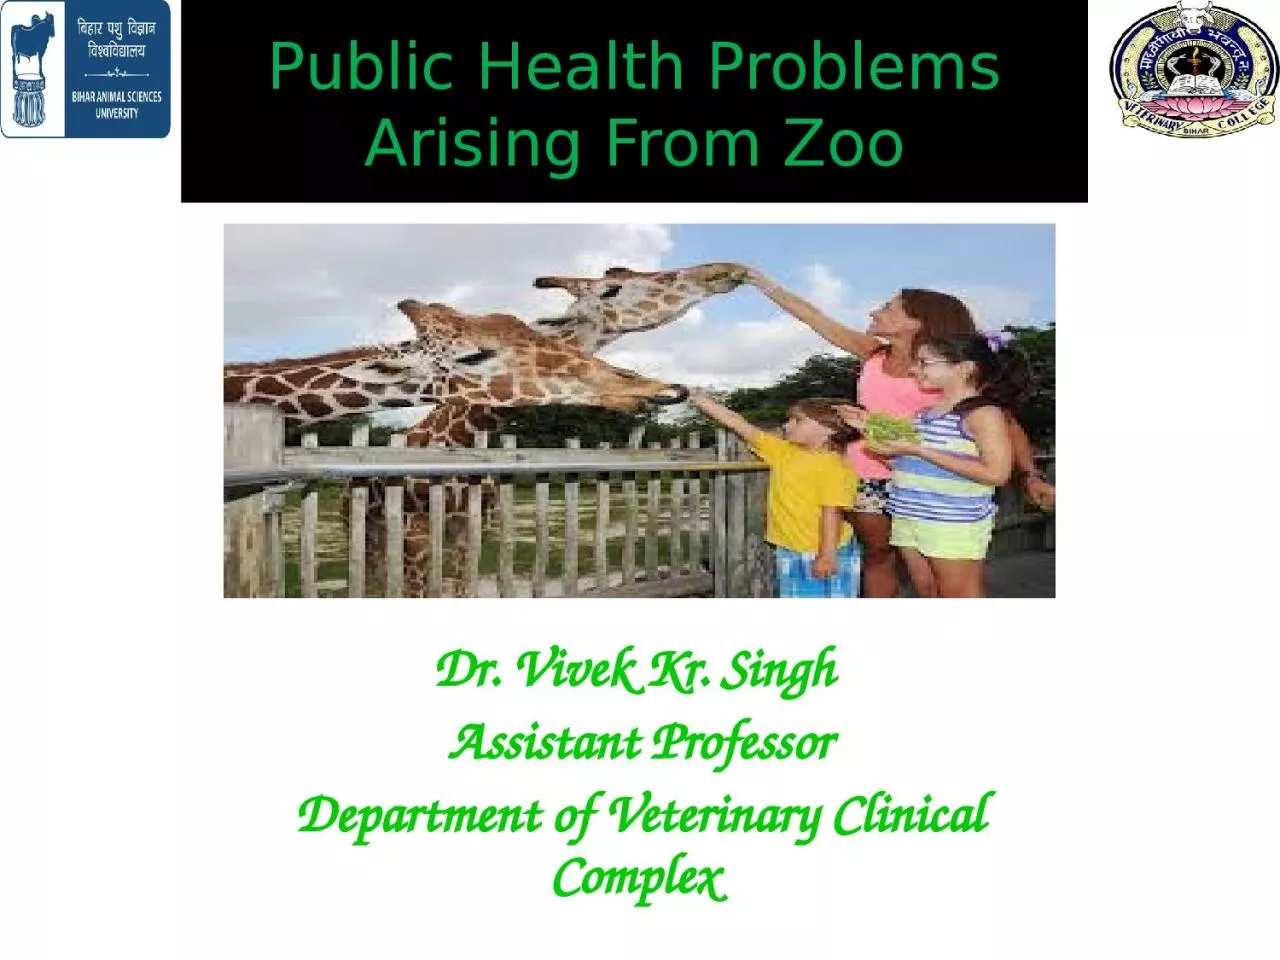 Public Health Problems Arising From Zoo